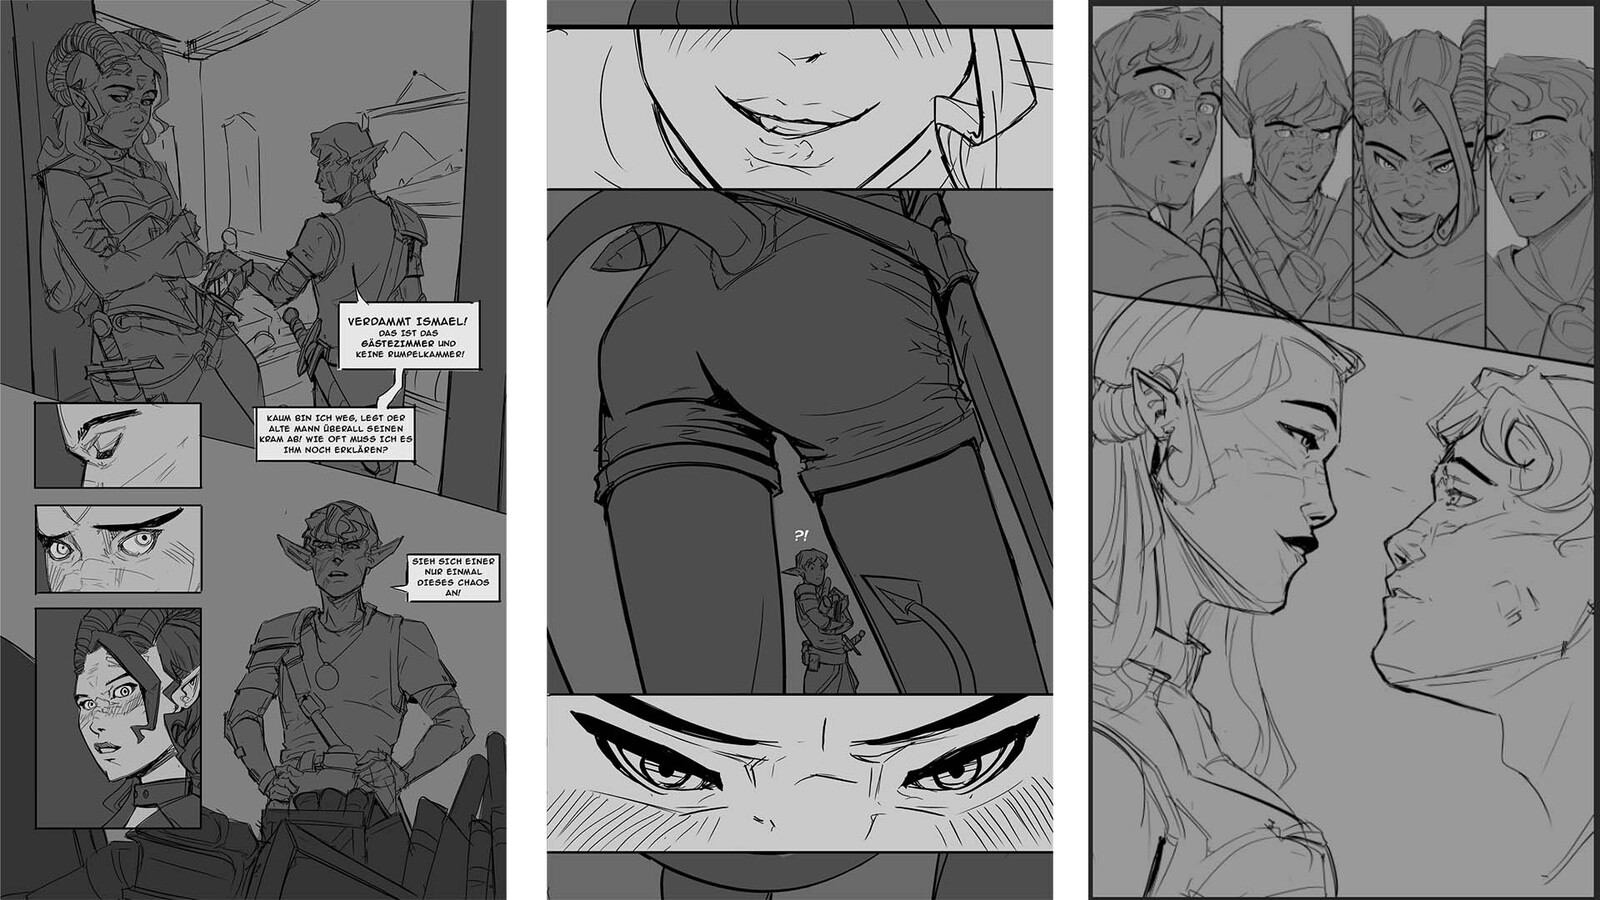 Work in Progress (Page 1 - 3)